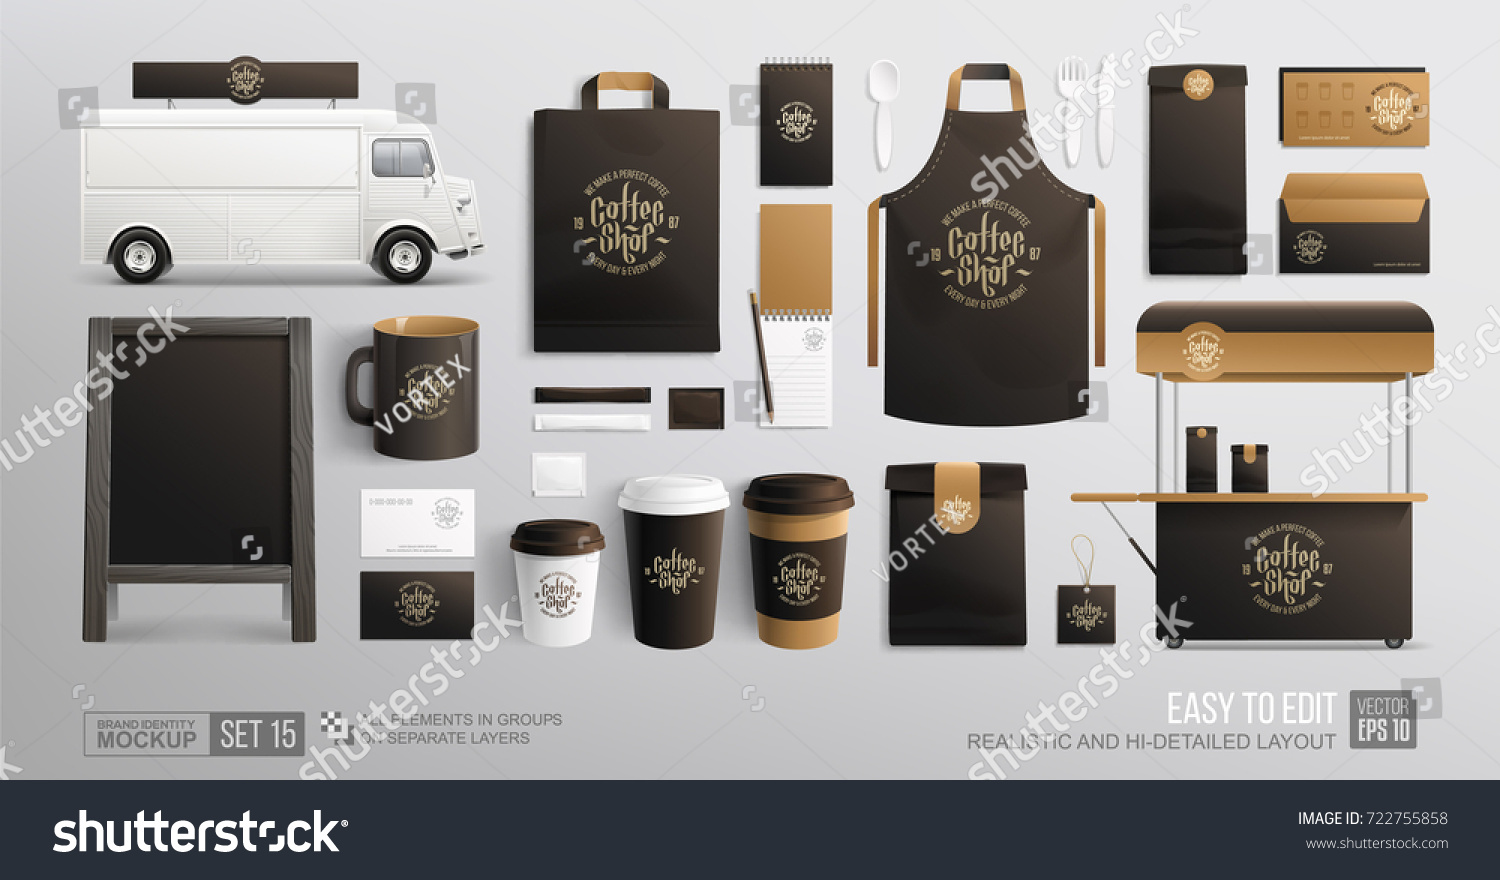 Download Coffee Cafe Food Cart Branding Corporate Stock Vector Royalty Free 722755858